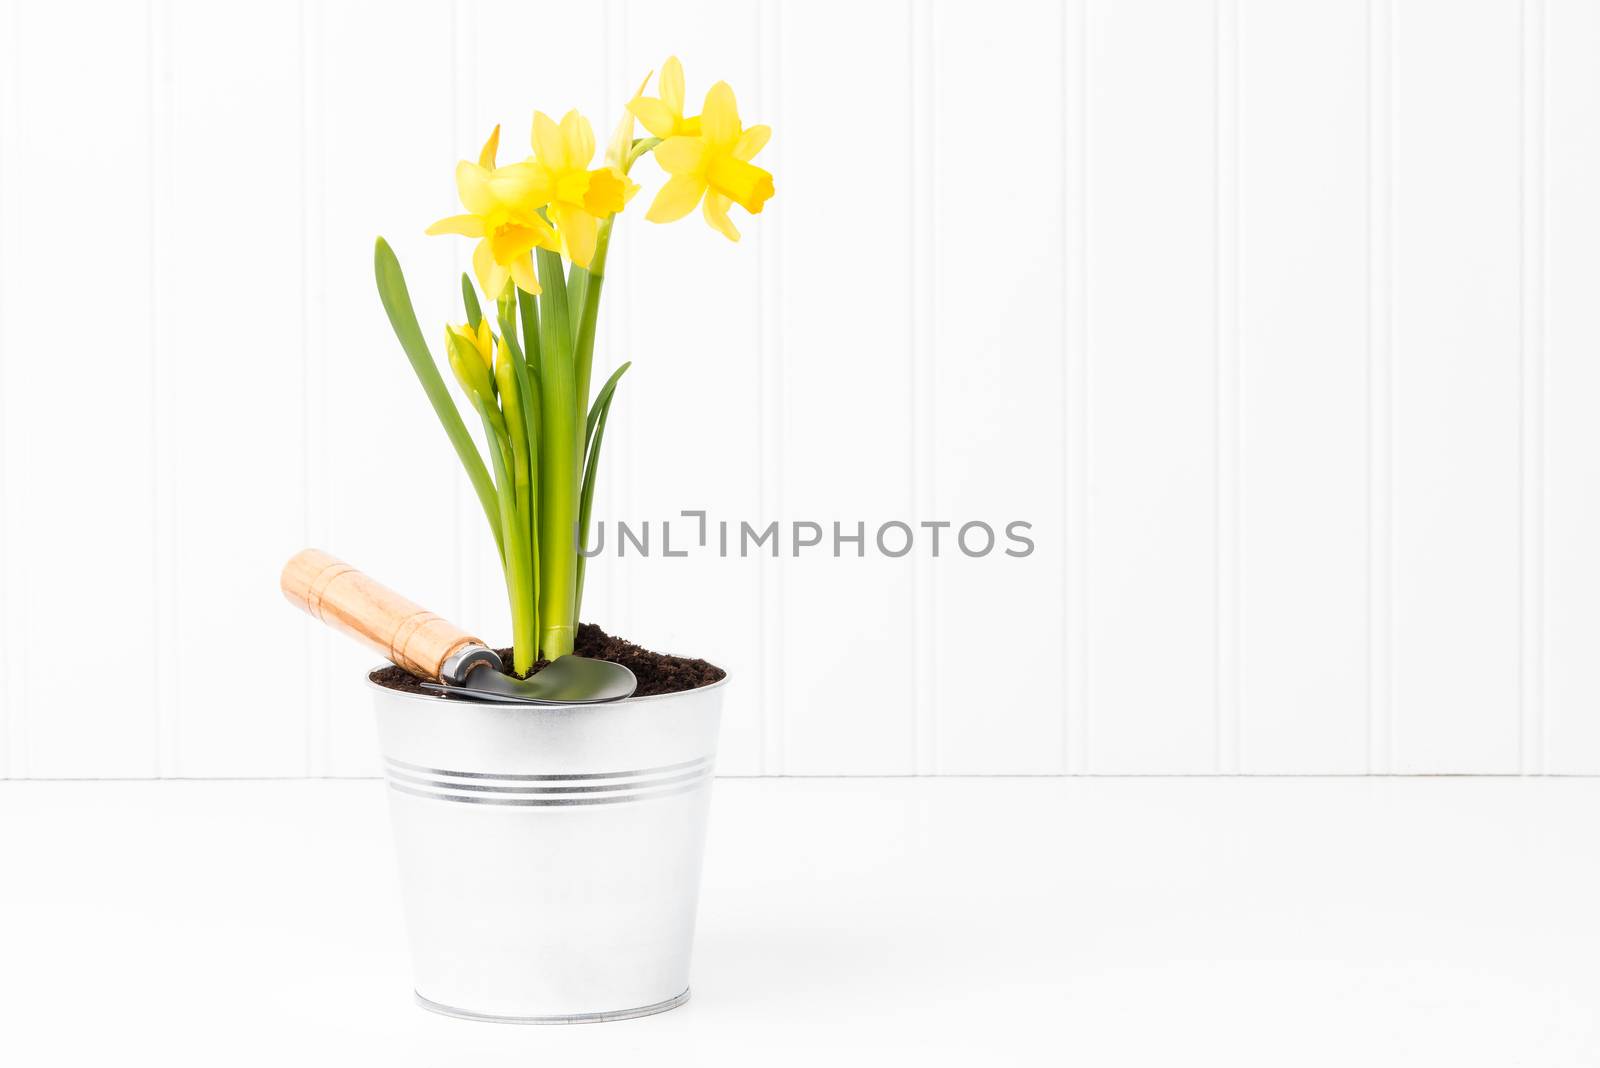 Clump of Daffodils by billberryphotography